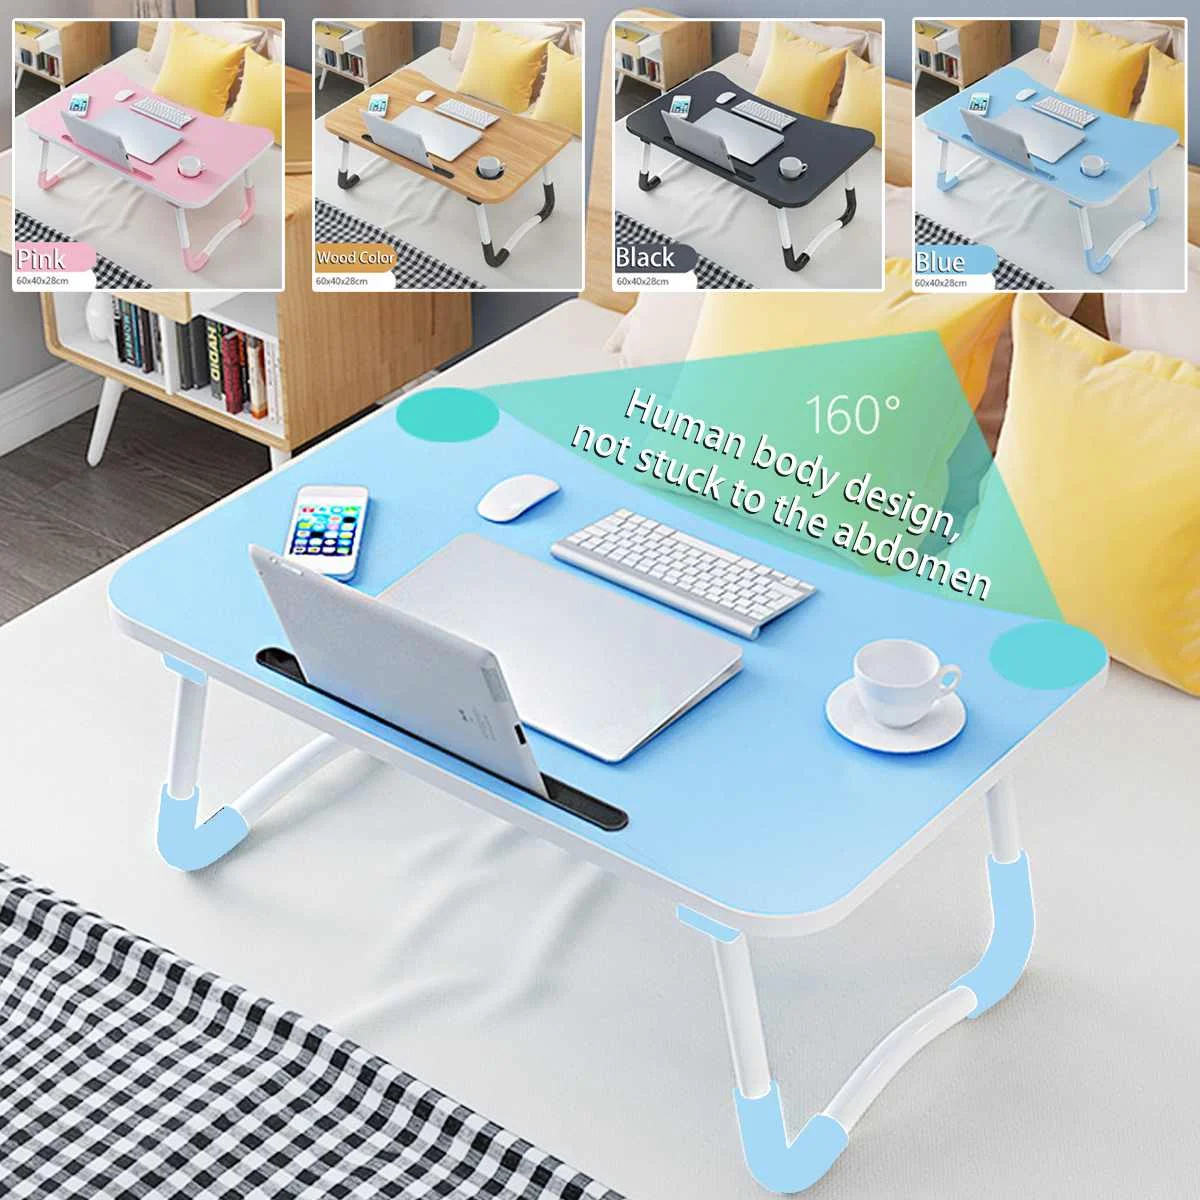 

Folding Laptop Table Notebook Desk Breakfast Serving Bed Trays Wooden Foldable Computer Desk Stand Portable Study Table Desk